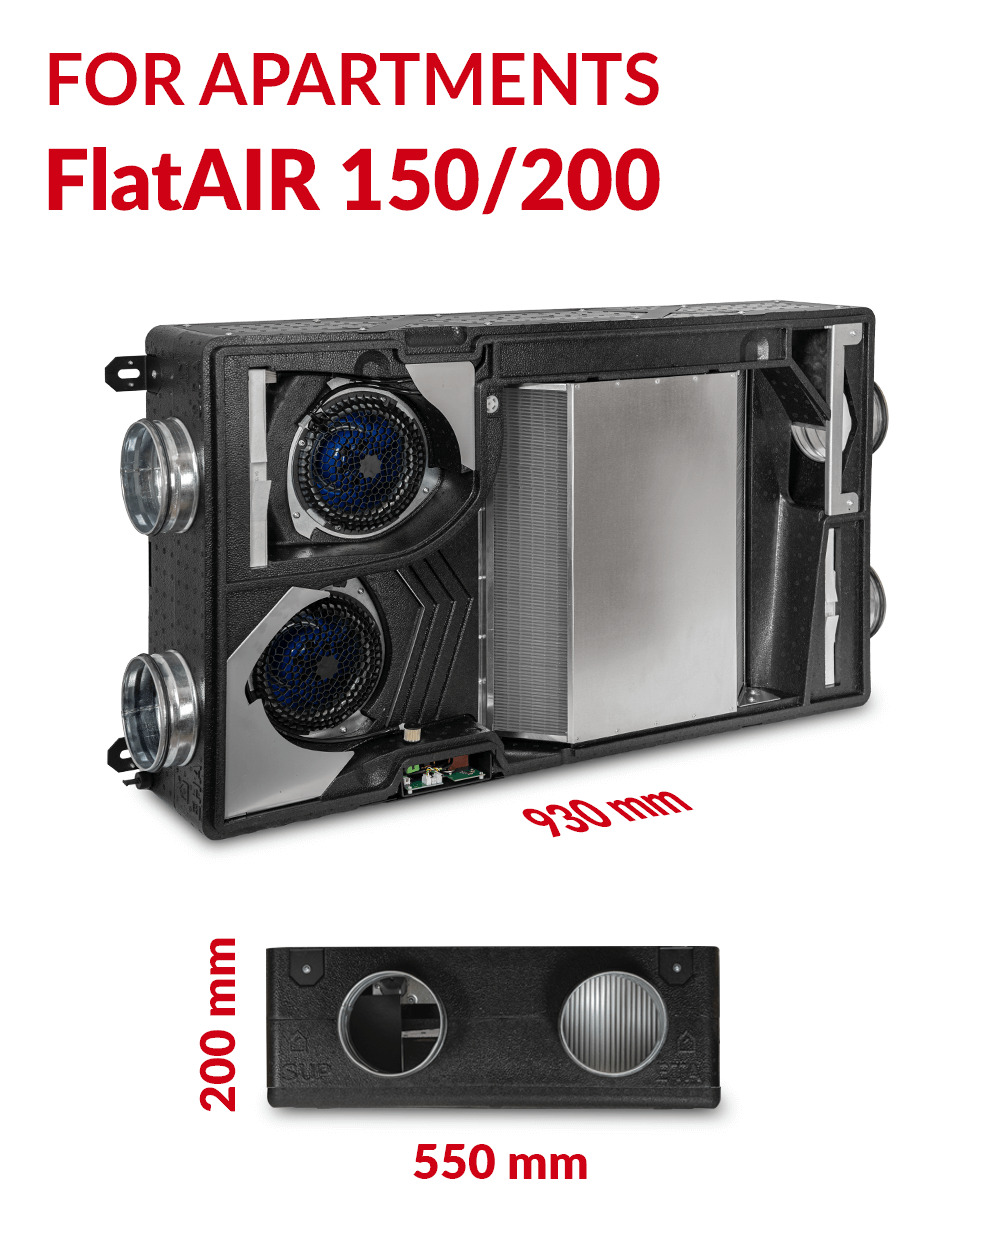 Heat recovery unit for apartments FlatAIR 150/200